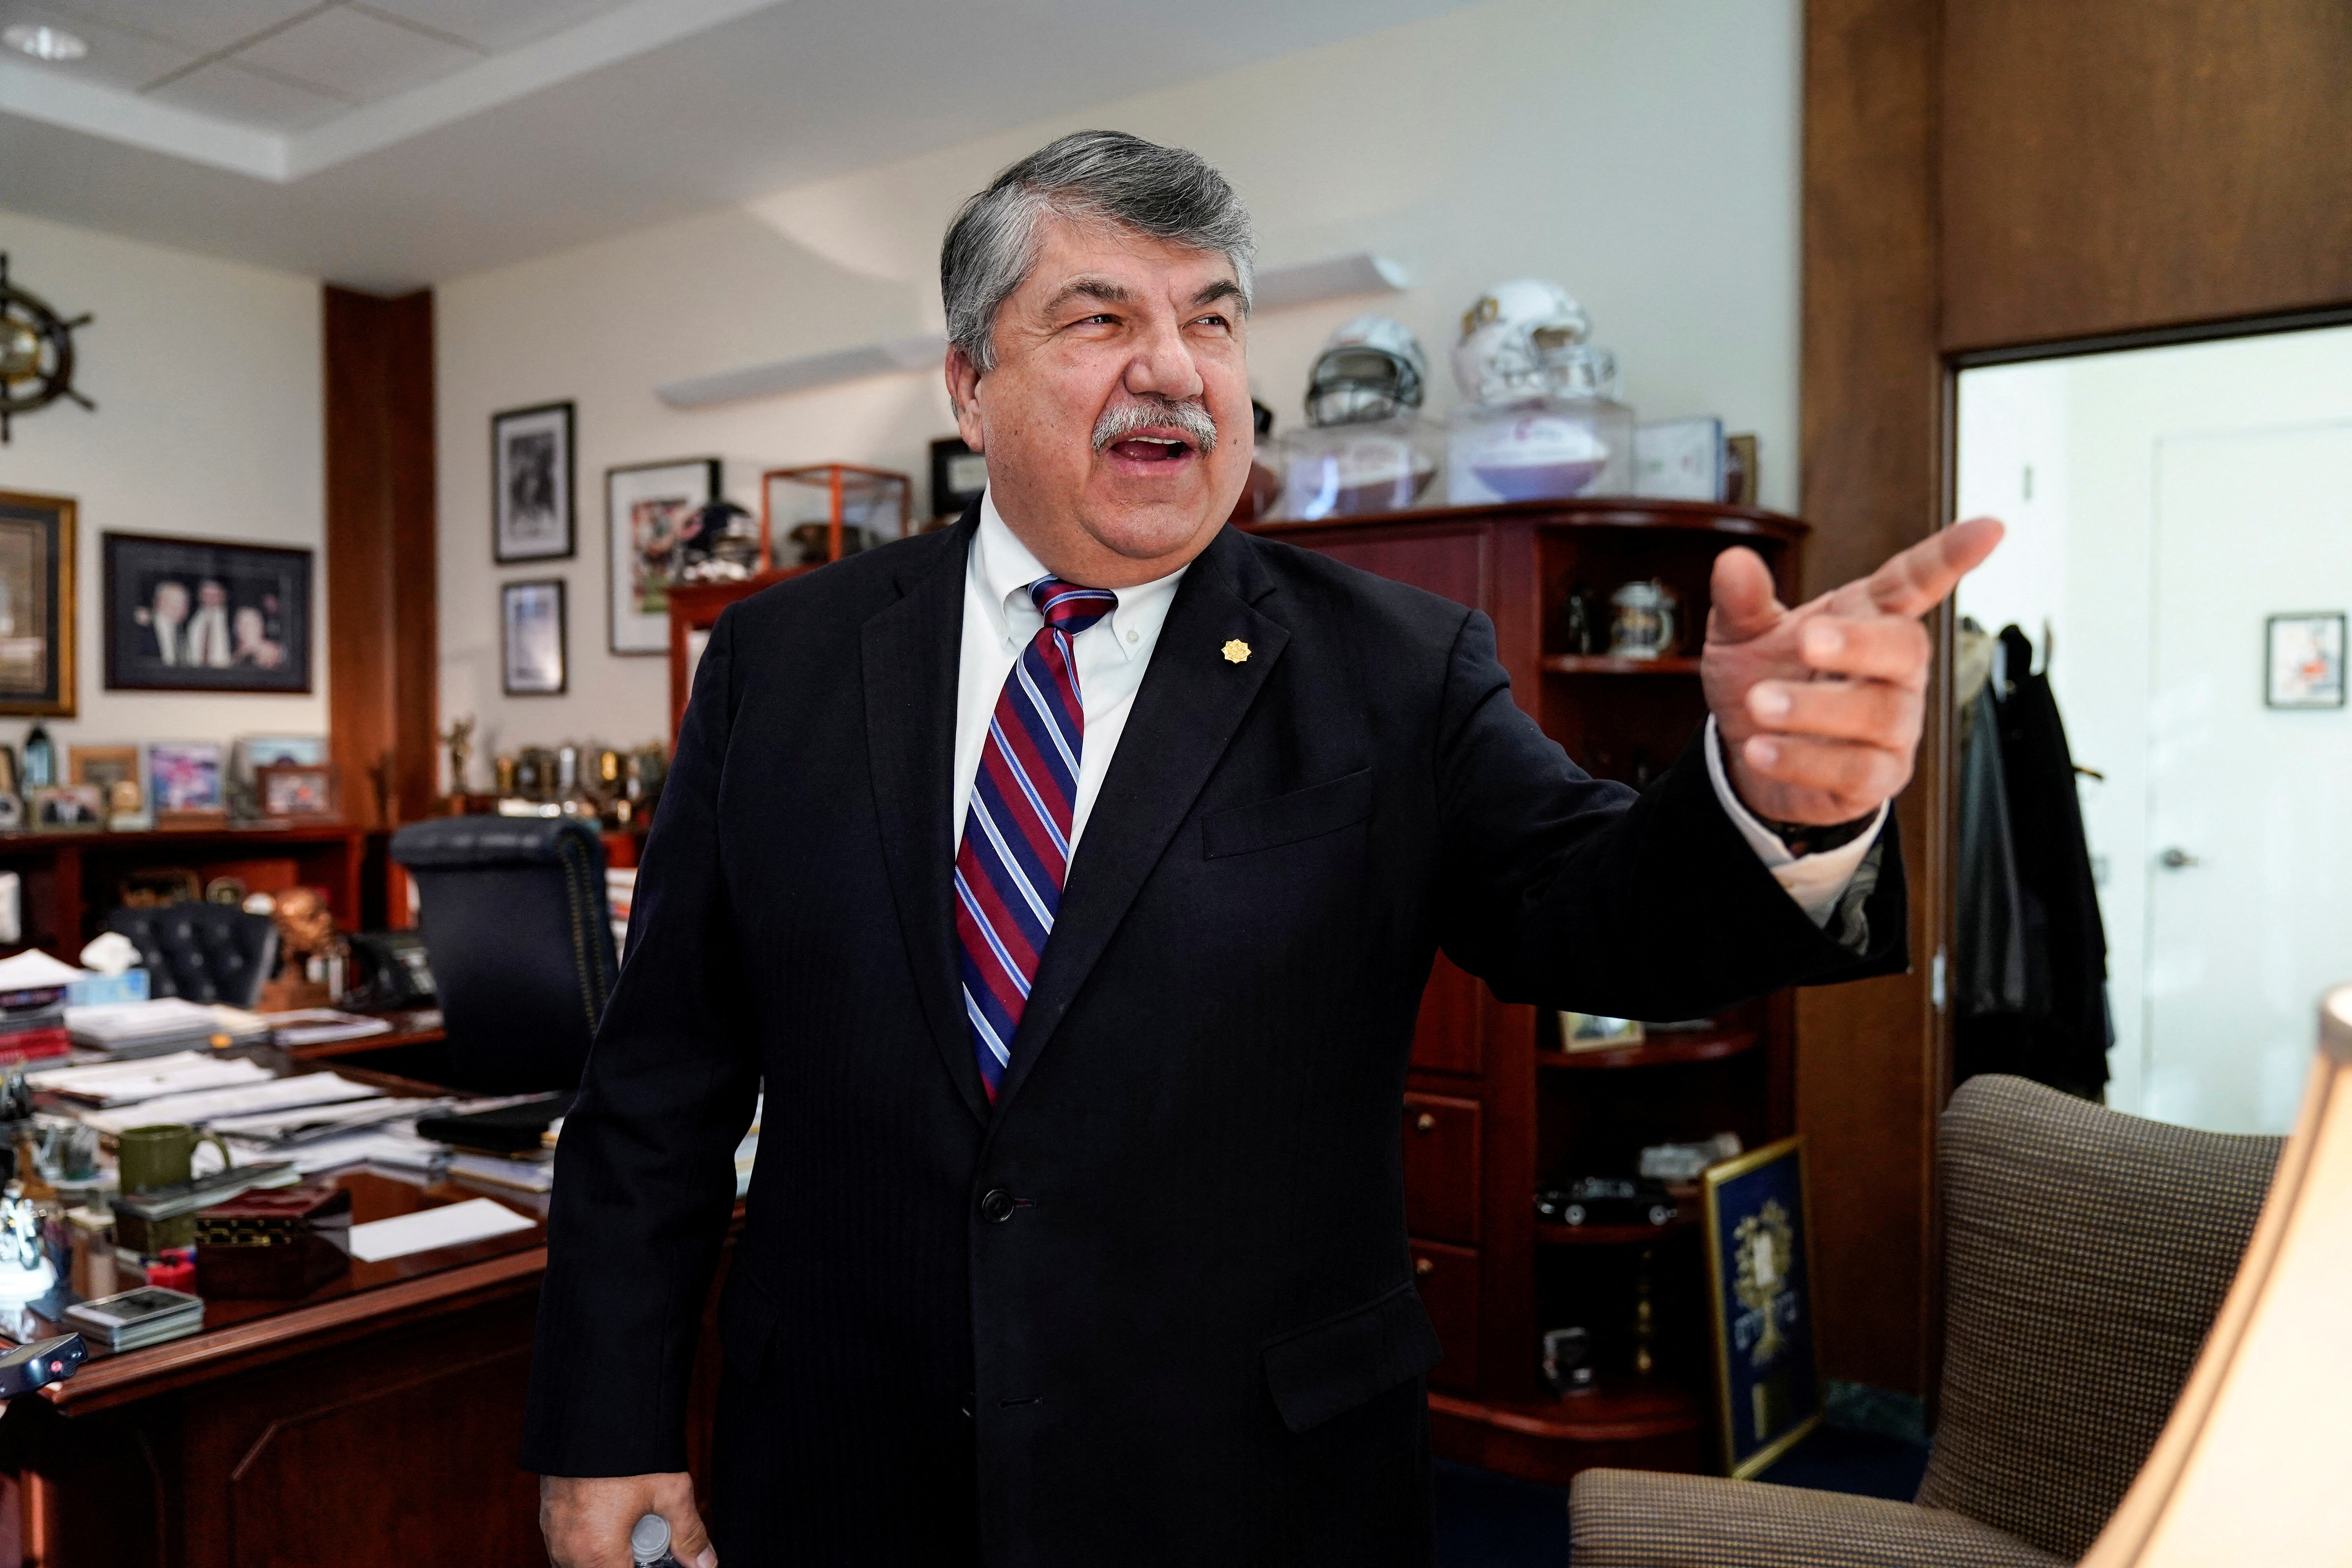 President of the AFL-CIO Richard Trumka speaks about his role in securing labor protections in the USMCA trade agreement in Washington